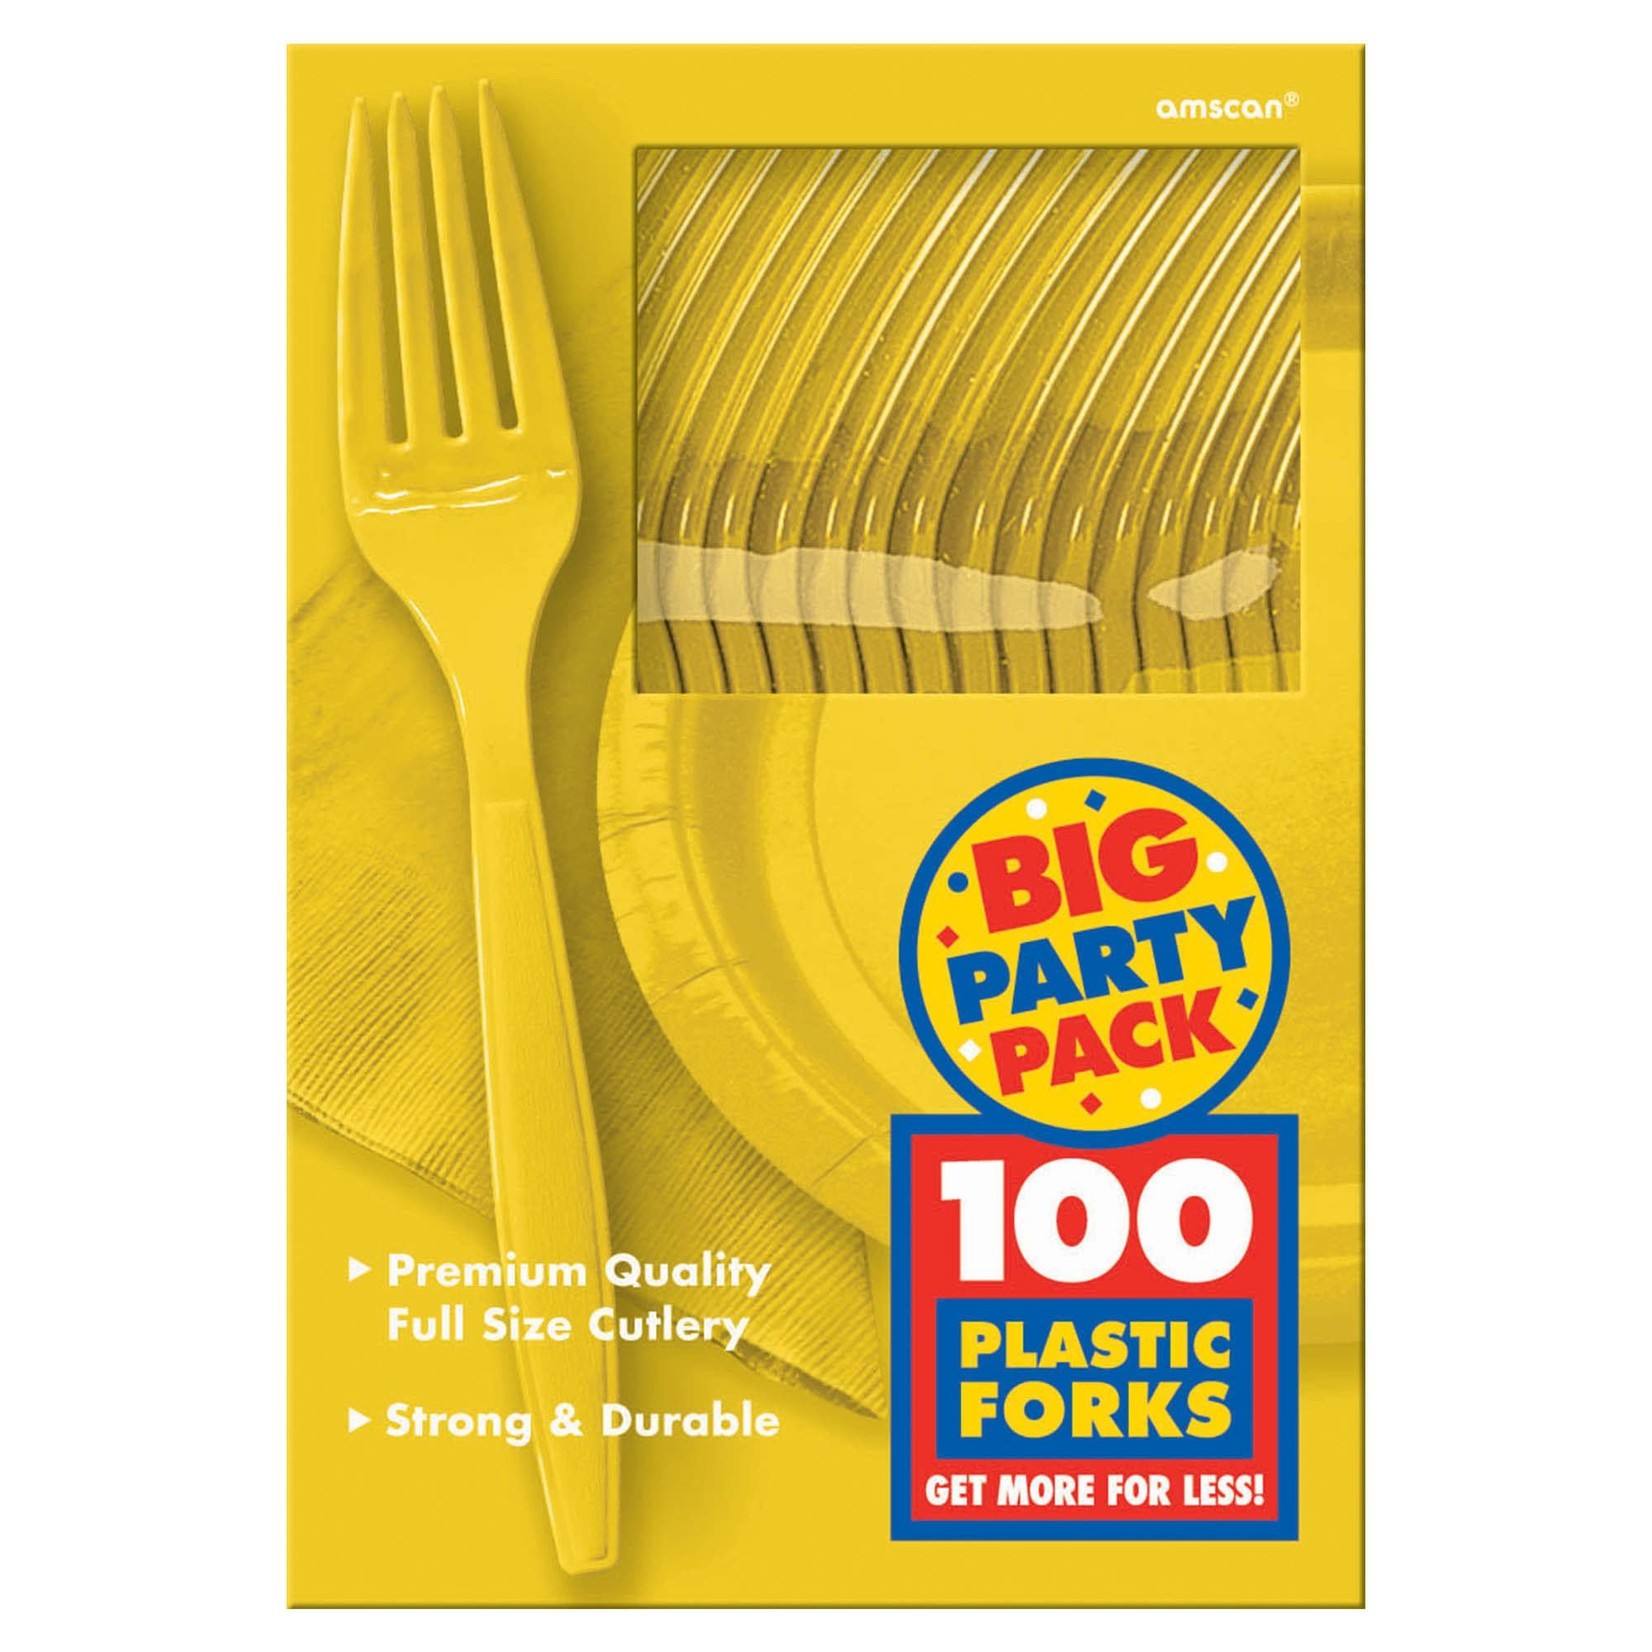 Big Party Pack Plastic Forks - Yellow Sunshine